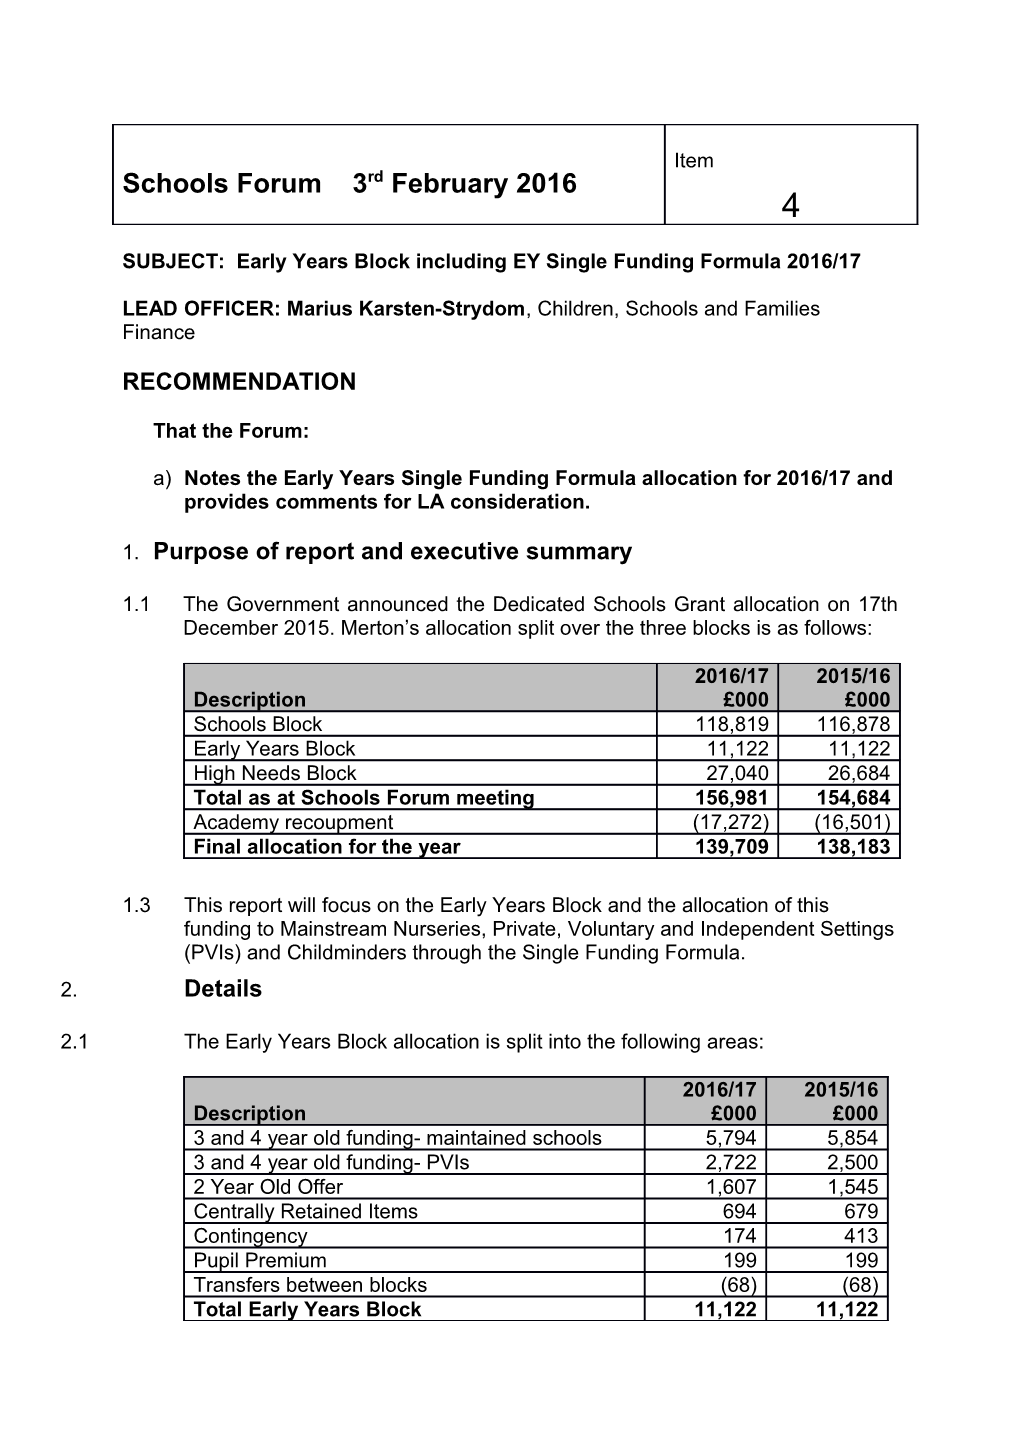 SUBJECT: Early Years Block Including EY Single Funding Formula 2016/17